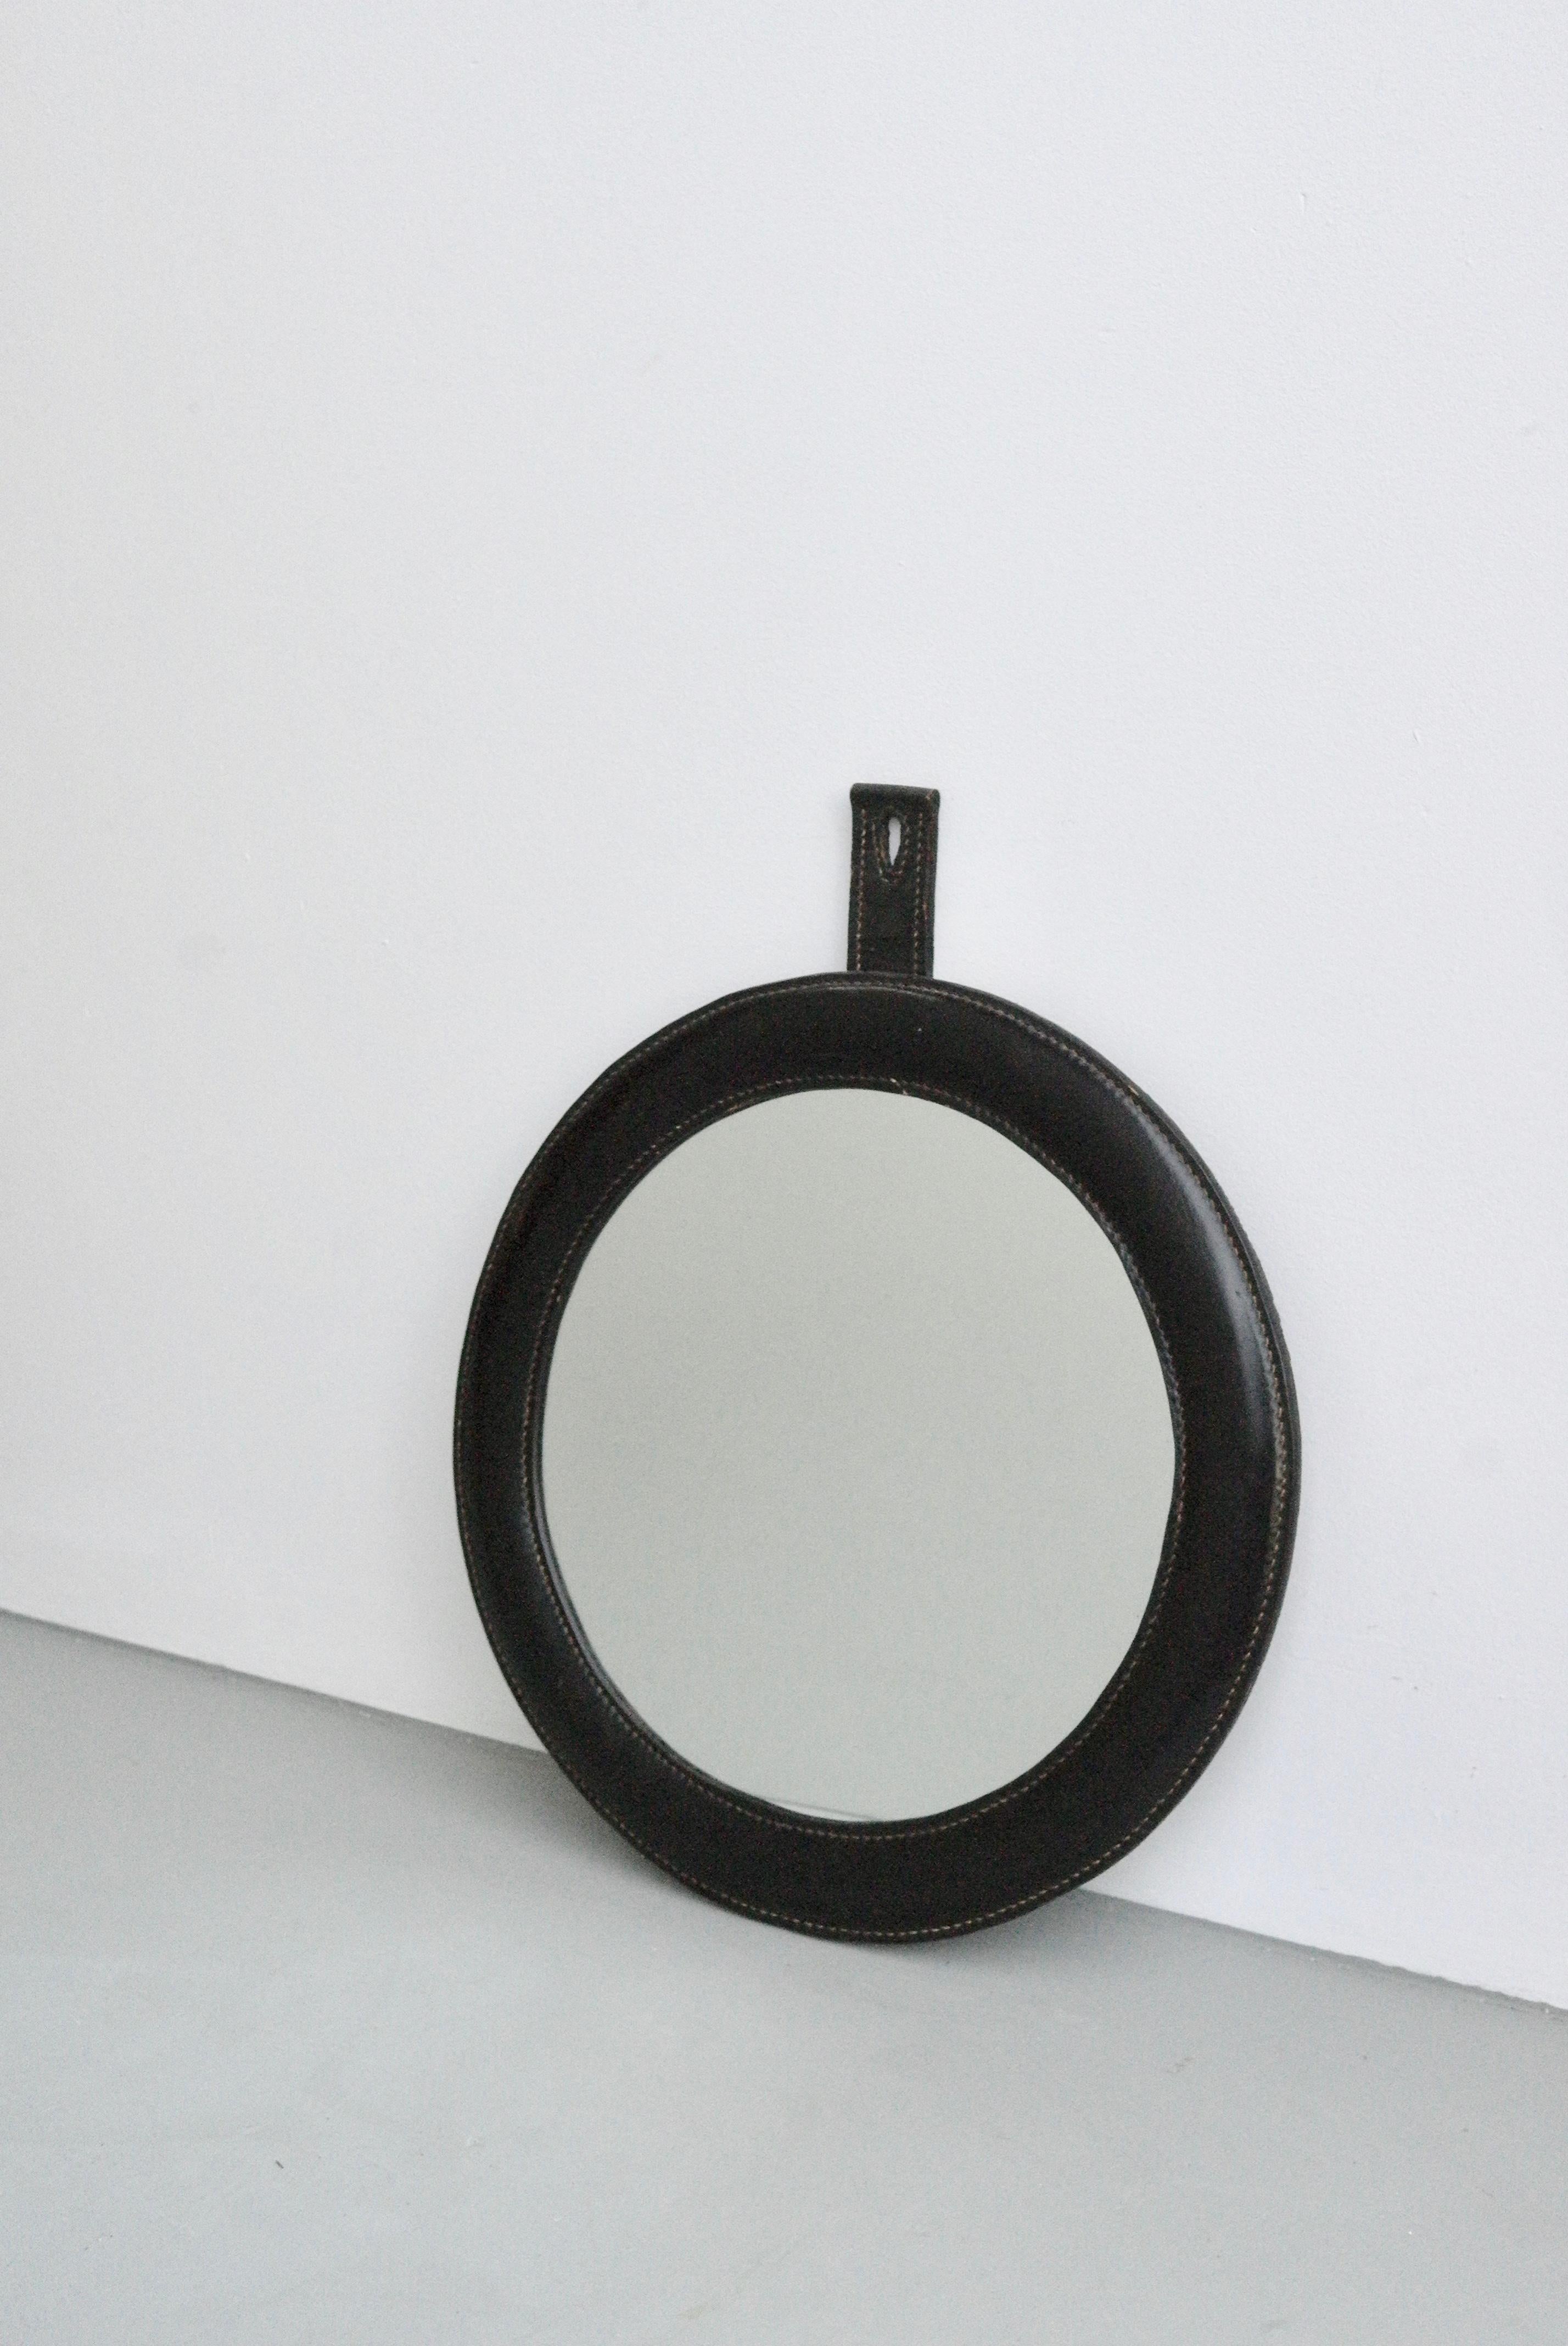 Hand-Stitched Black Leather Wall Mirror in Style of Jacques Adnet In Good Condition For Sale In Den Haag, NL